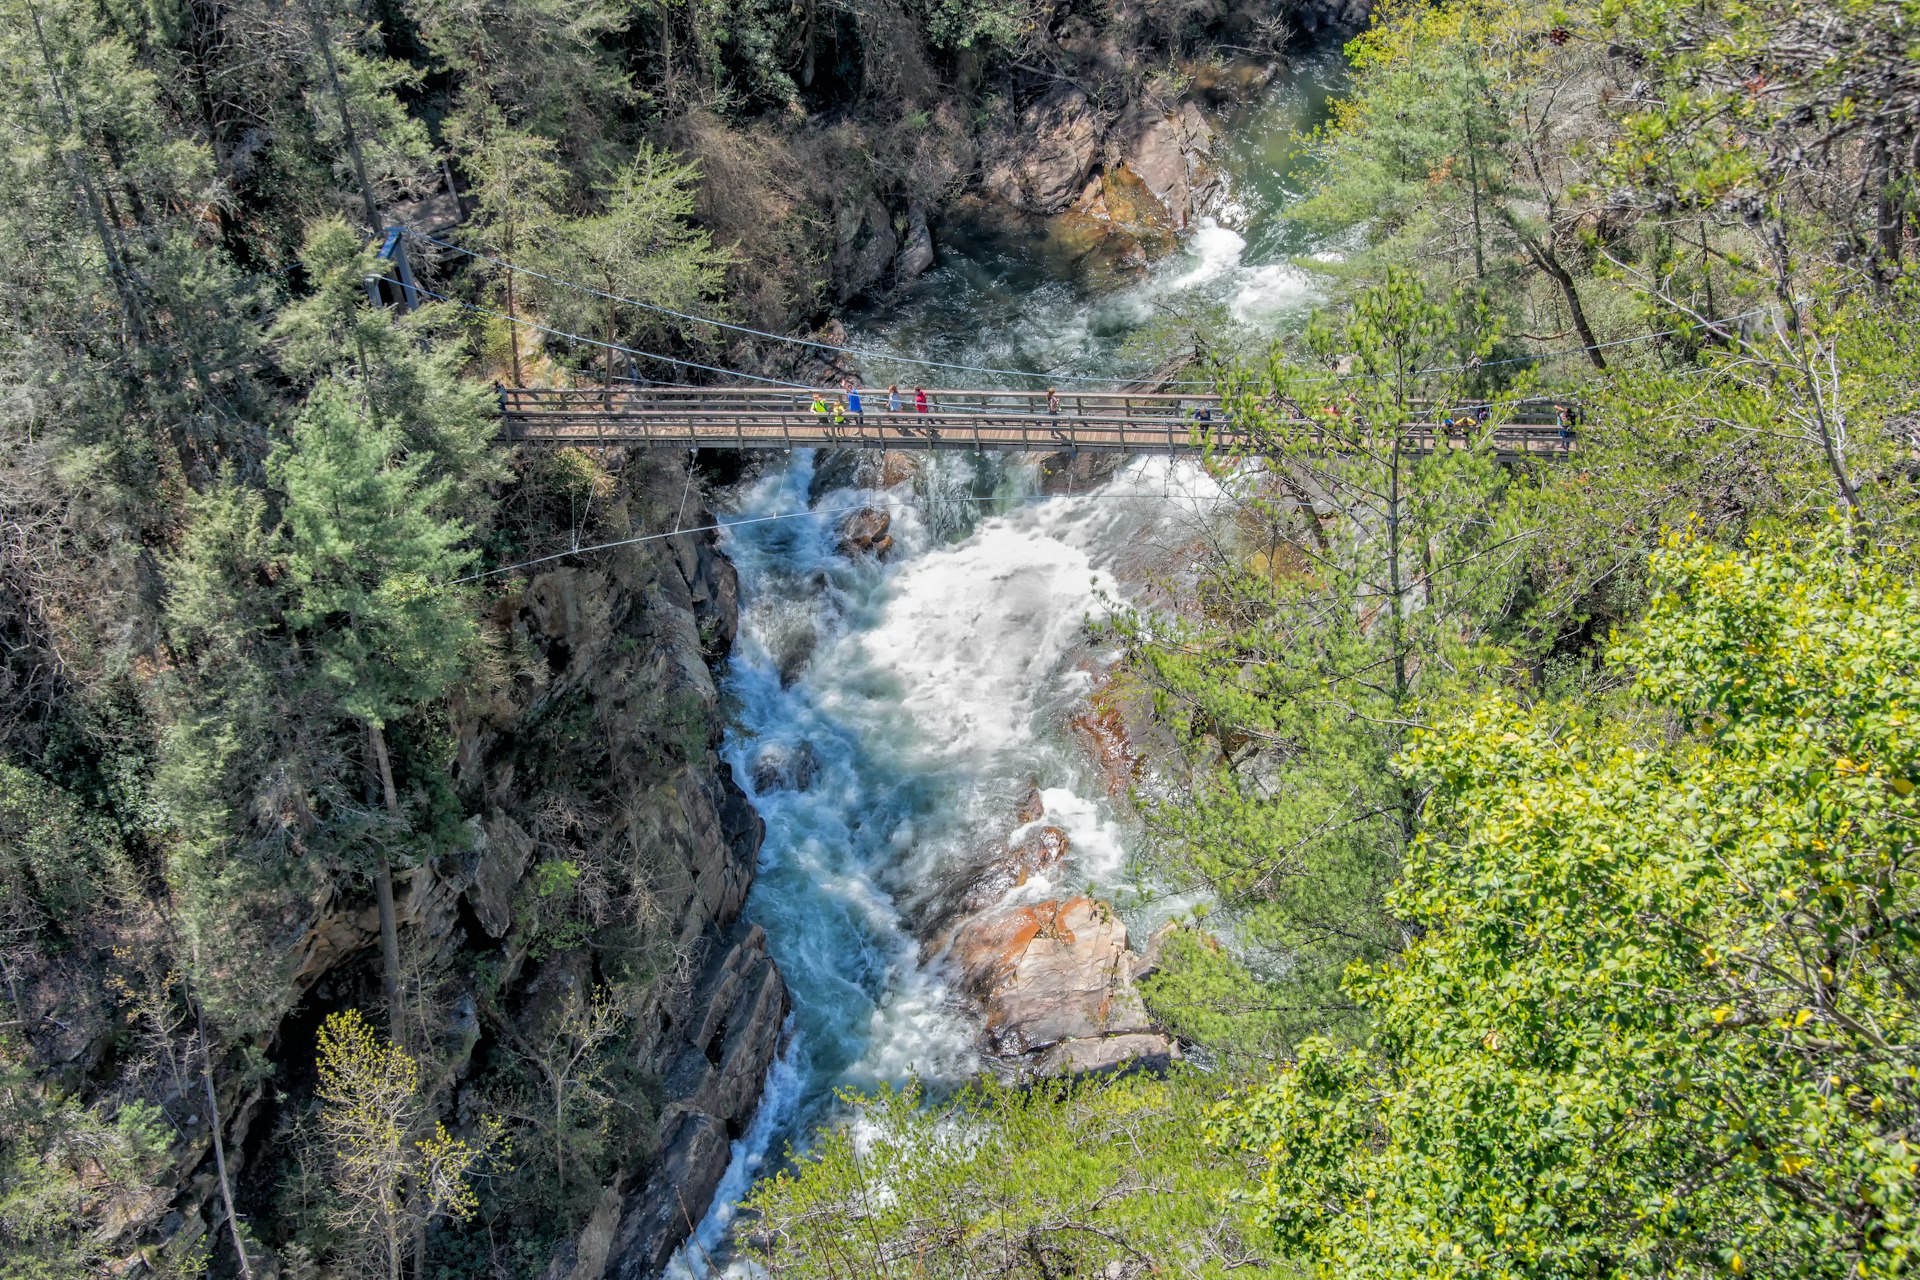 White water pours down Hurricane Falls, with hikers observing the torrent from a suspension bridge over Tallulah Gorge 